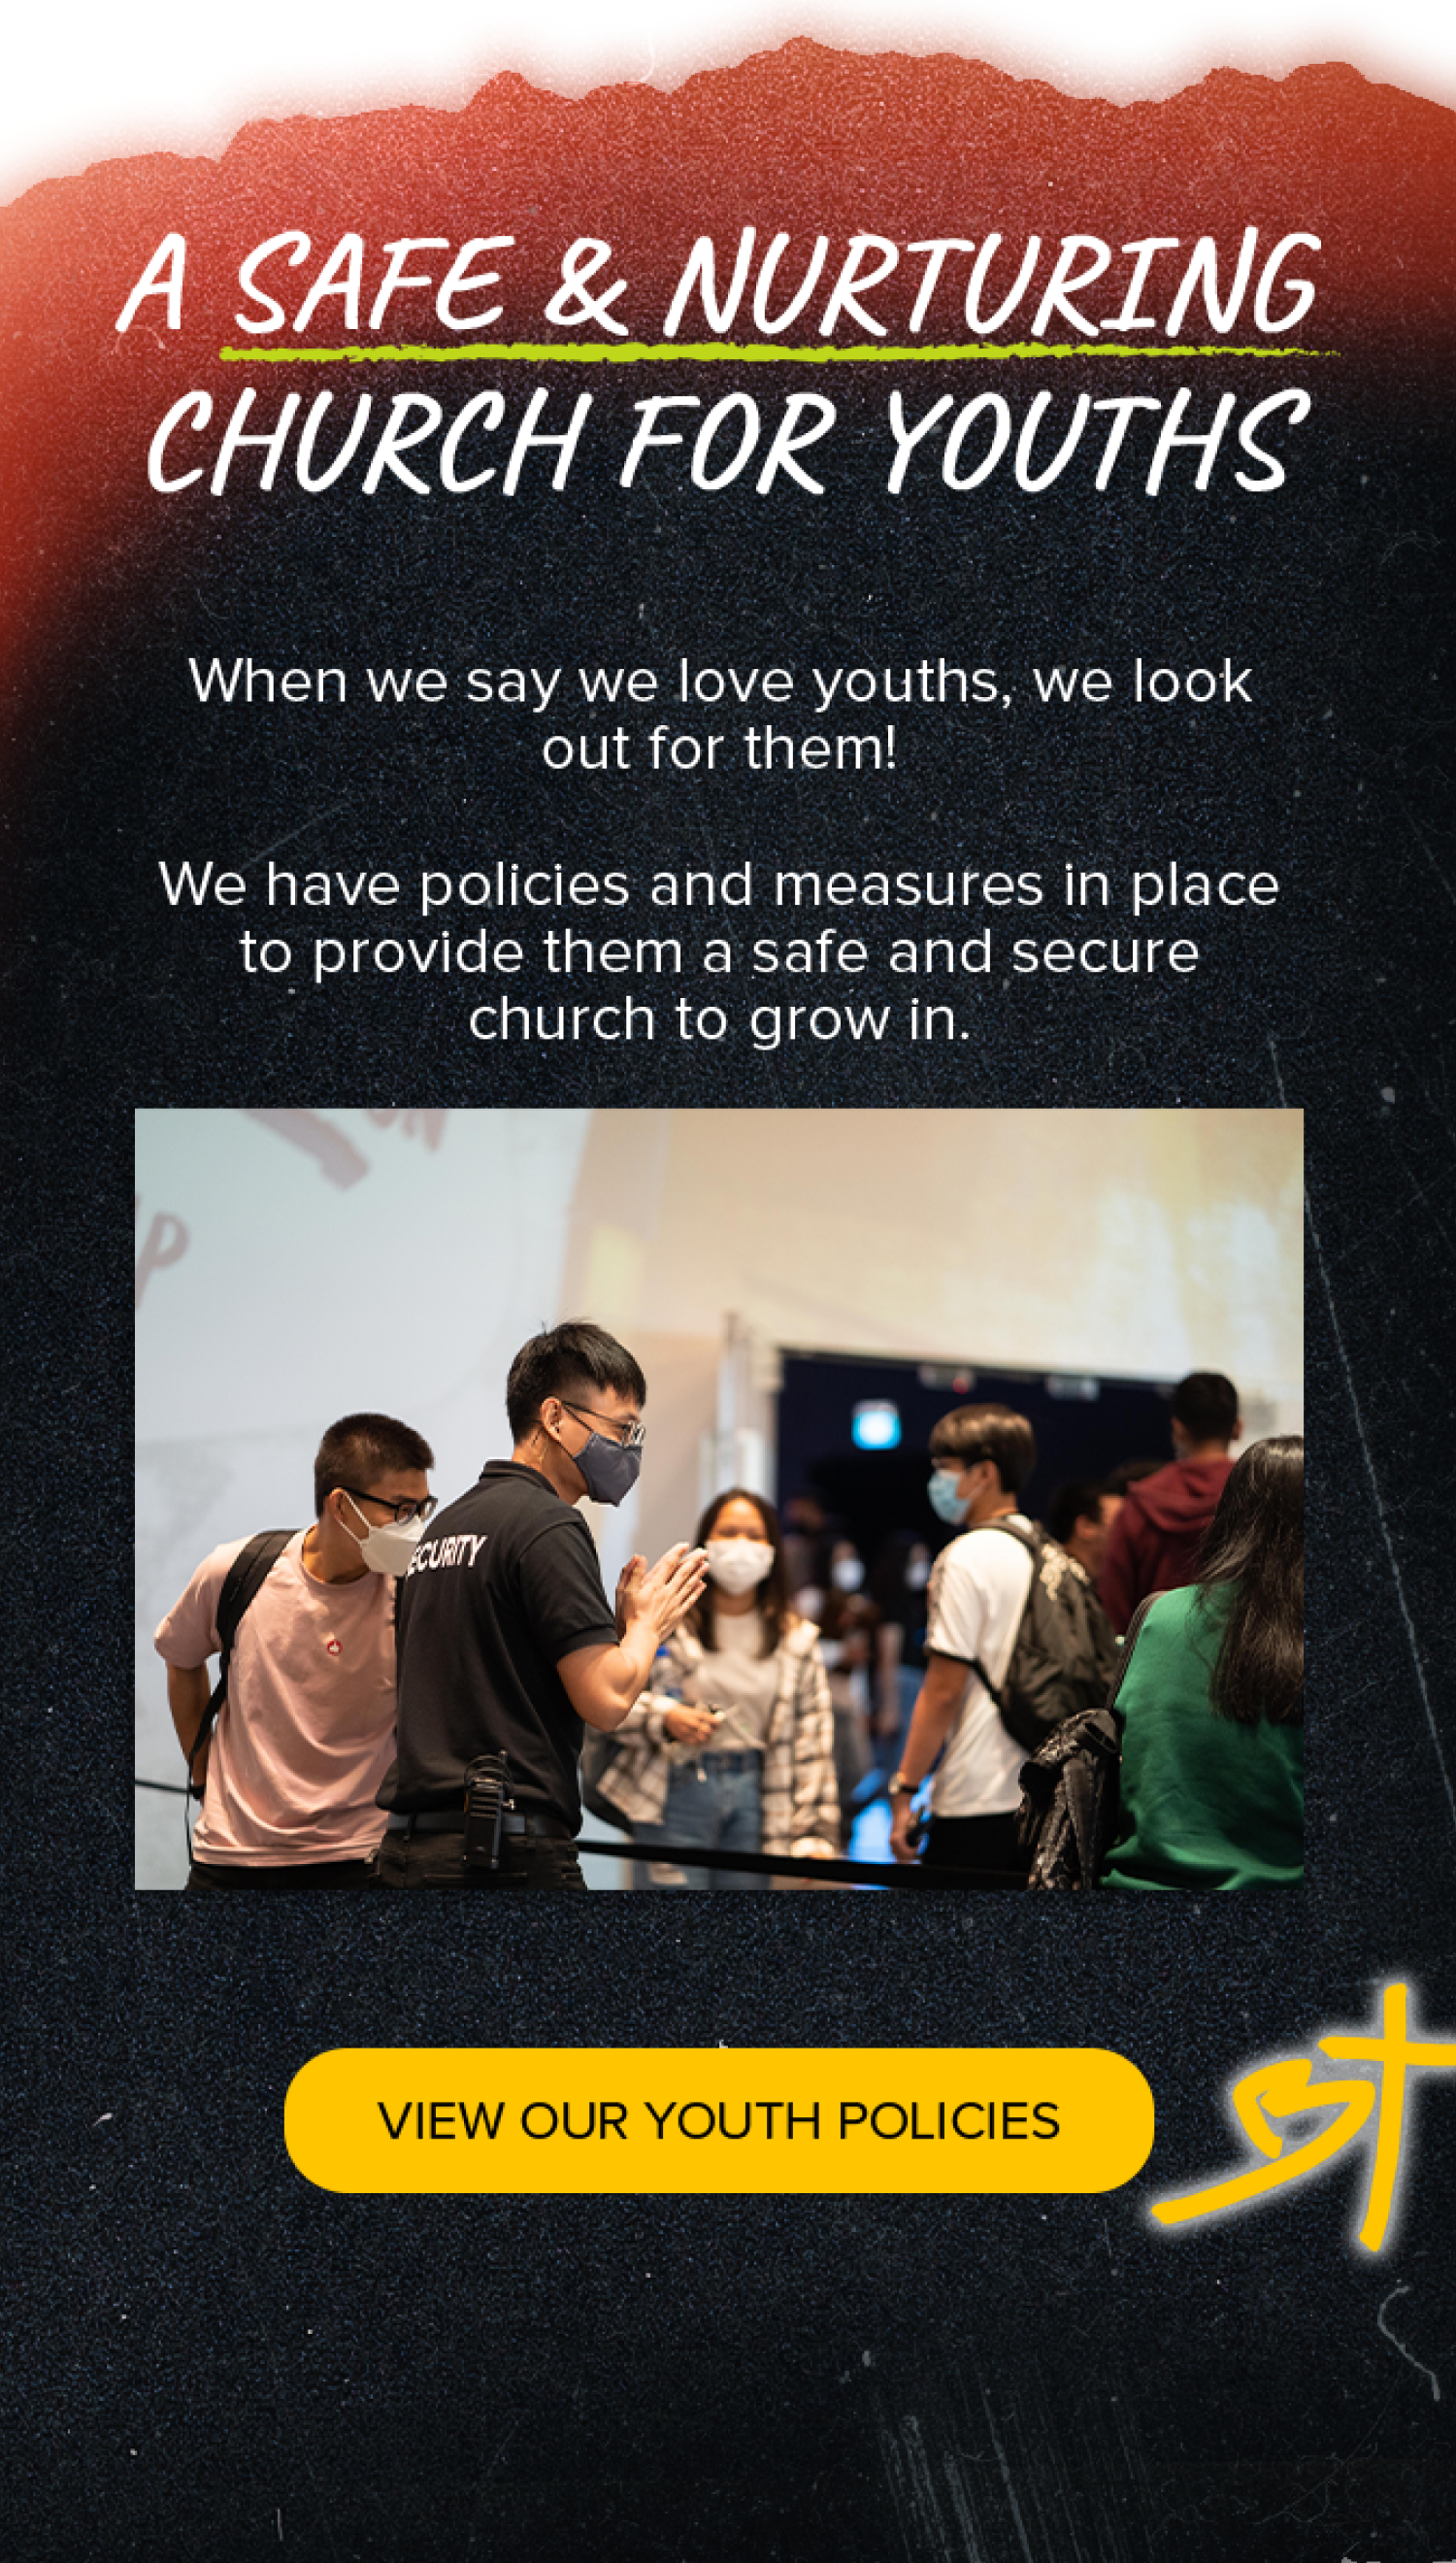 A Safe and Nurturing Church for Youth Image